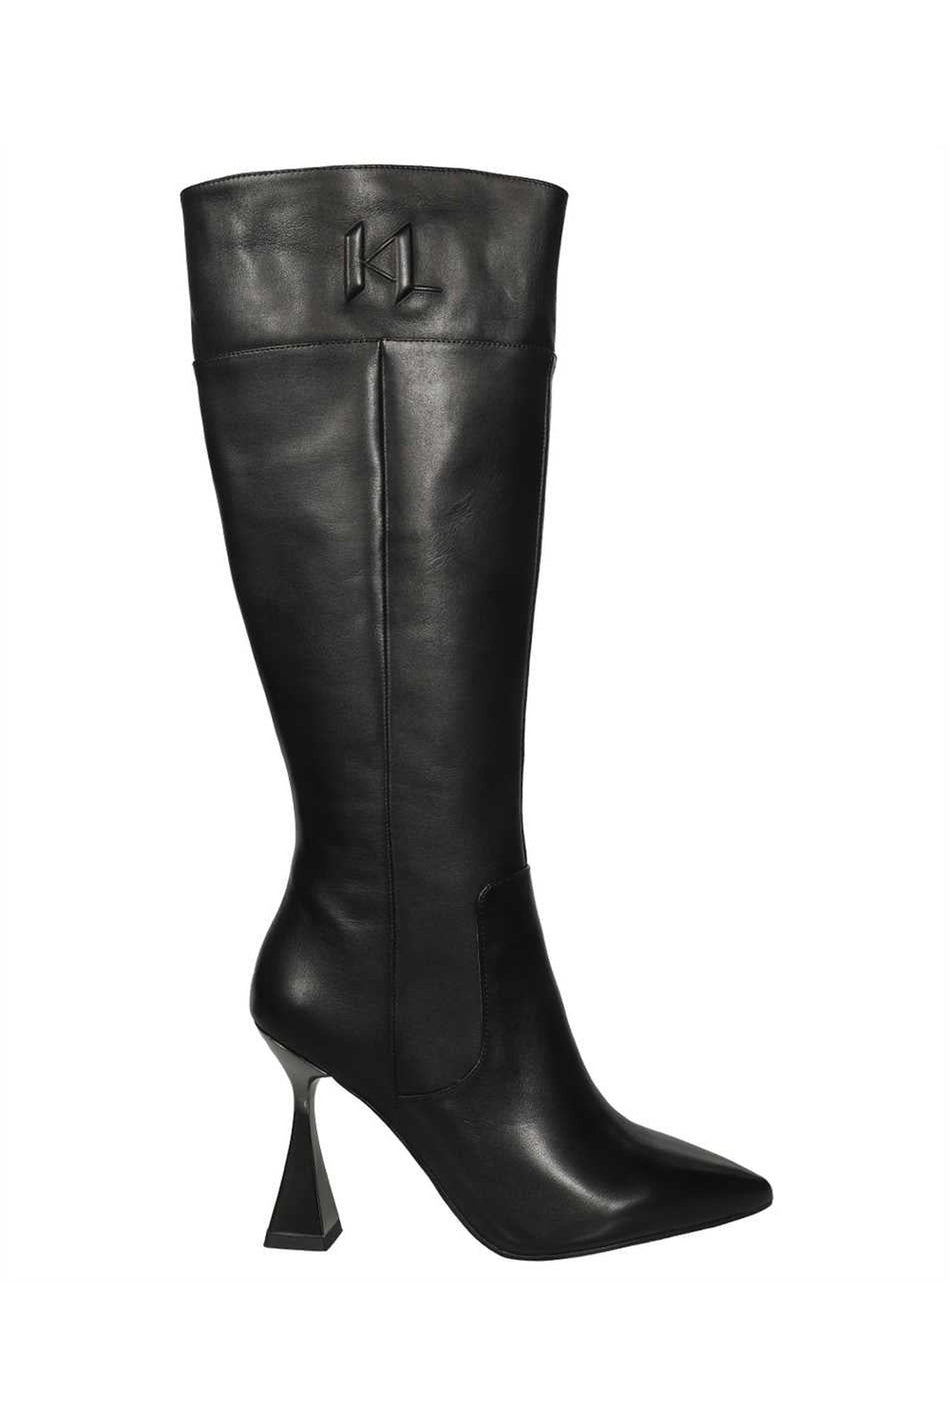 Leather boots-Karl Lagerfeld-OUTLET-SALE-35-ARCHIVIST